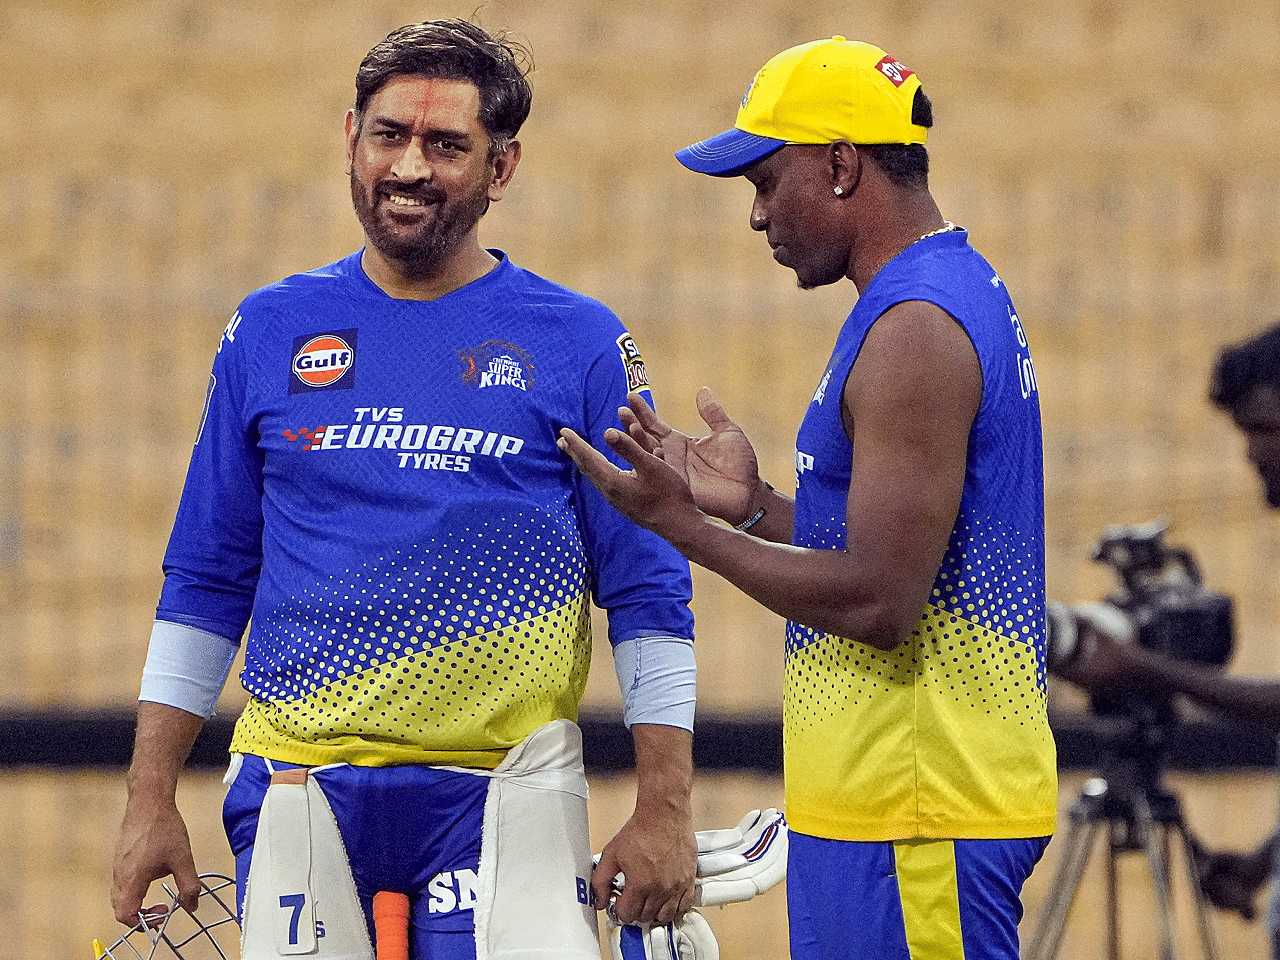 ‘100 percent’: Dwayne Bravo confirms MS Dhoni’s return for CSK next season, says Impact Player rule will ‘prolong’ his career